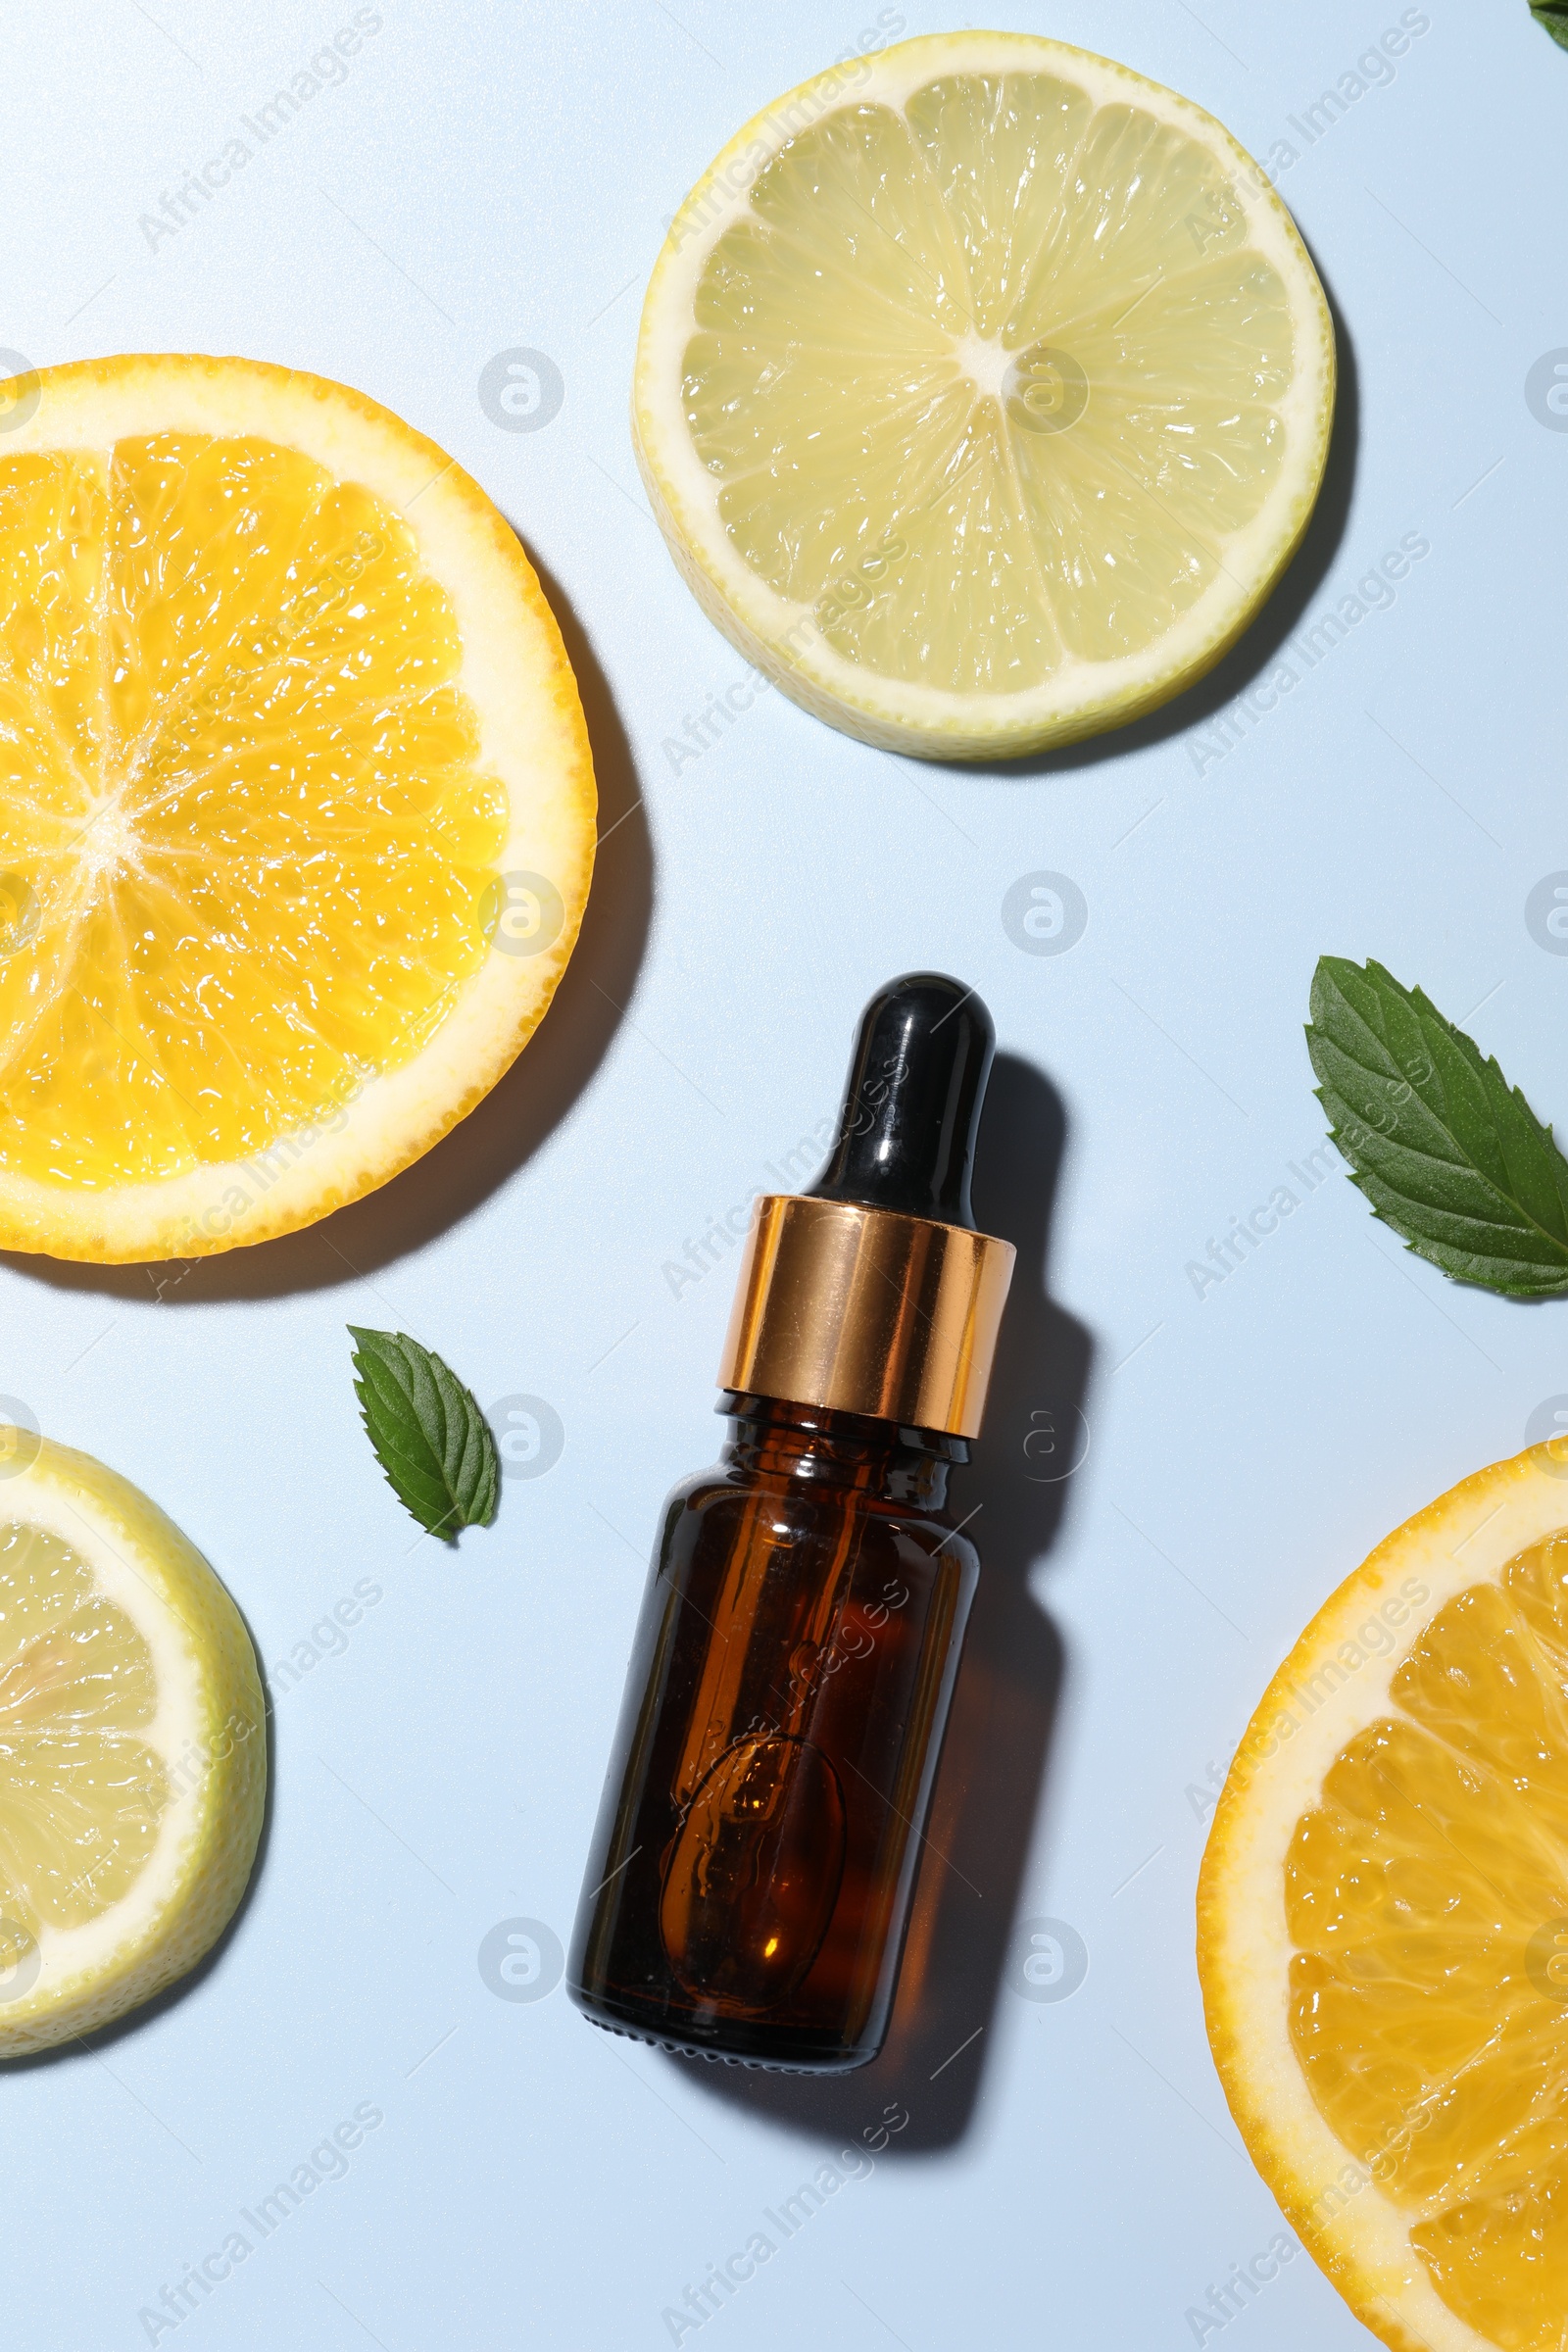 Photo of Bottle of cosmetic serum, sliced citrus fruits and green leaves on light blue background, flat lay